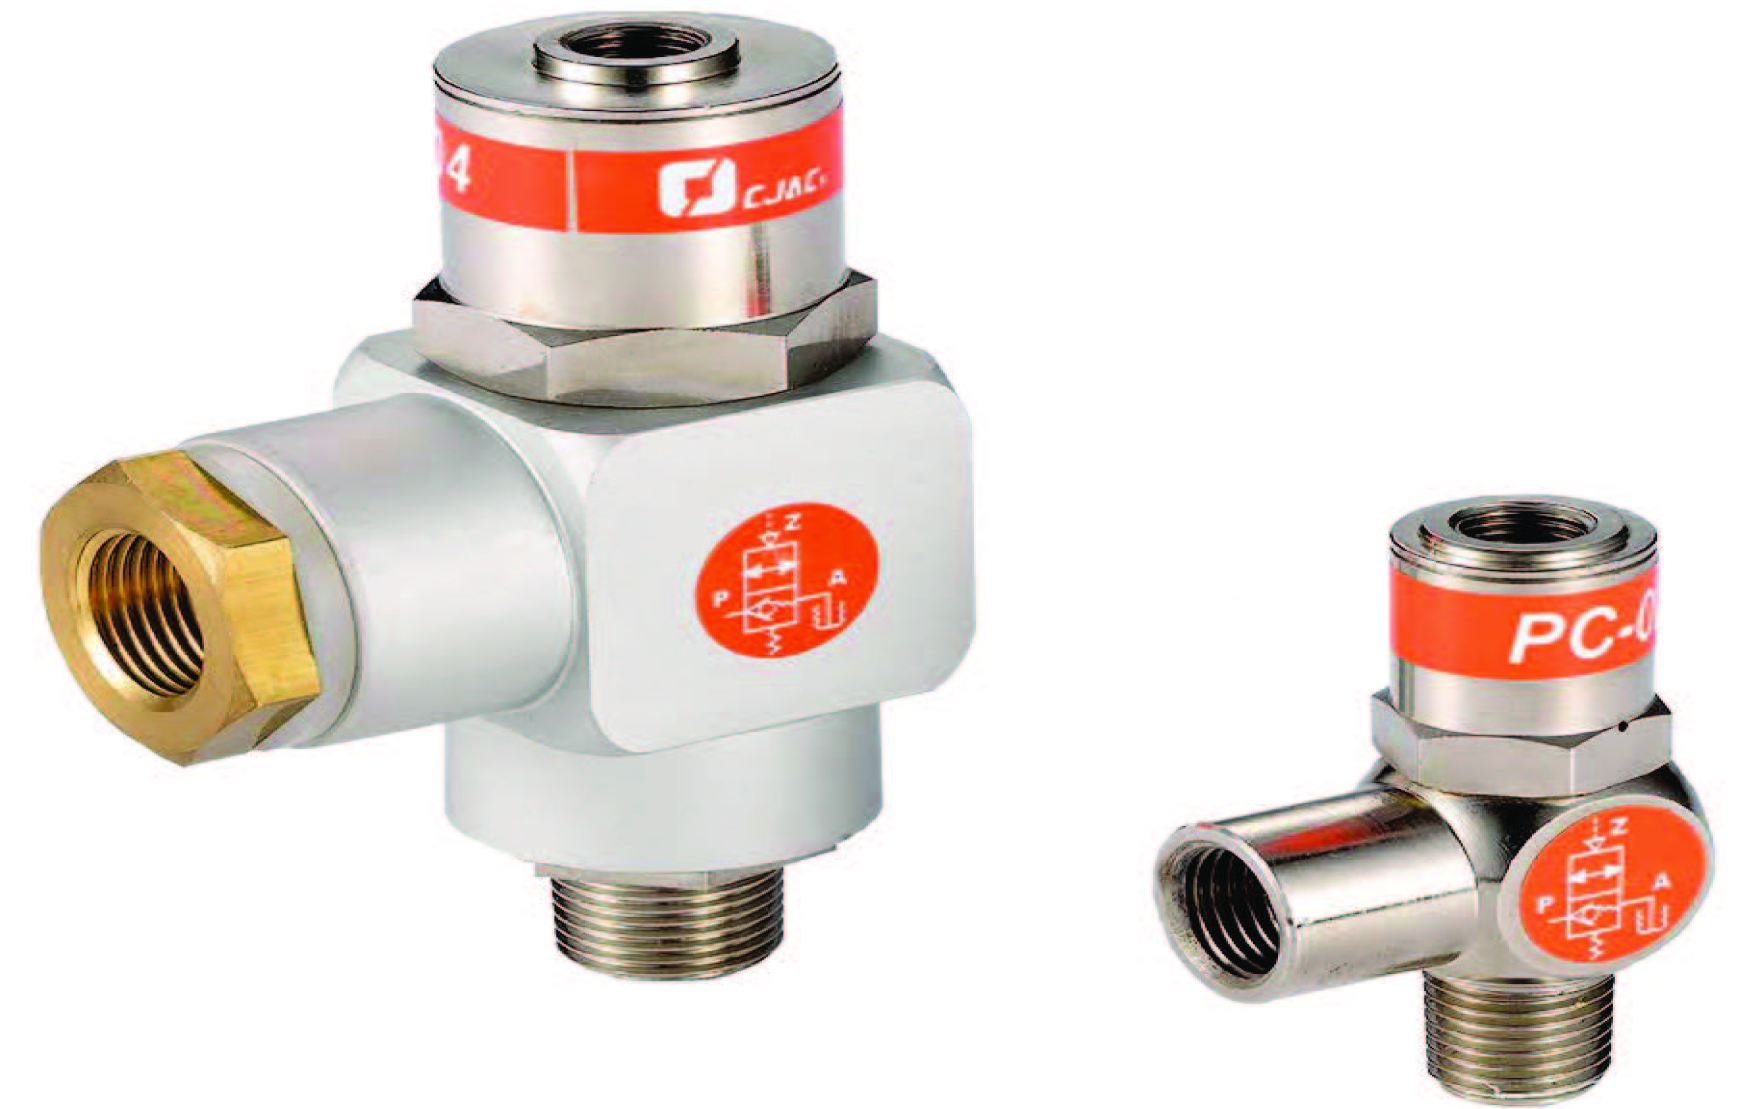 https://eurotec.com.tr/wp-content/uploads/2020/10/PC-Pilot-Operated-Check-Valve-1.png